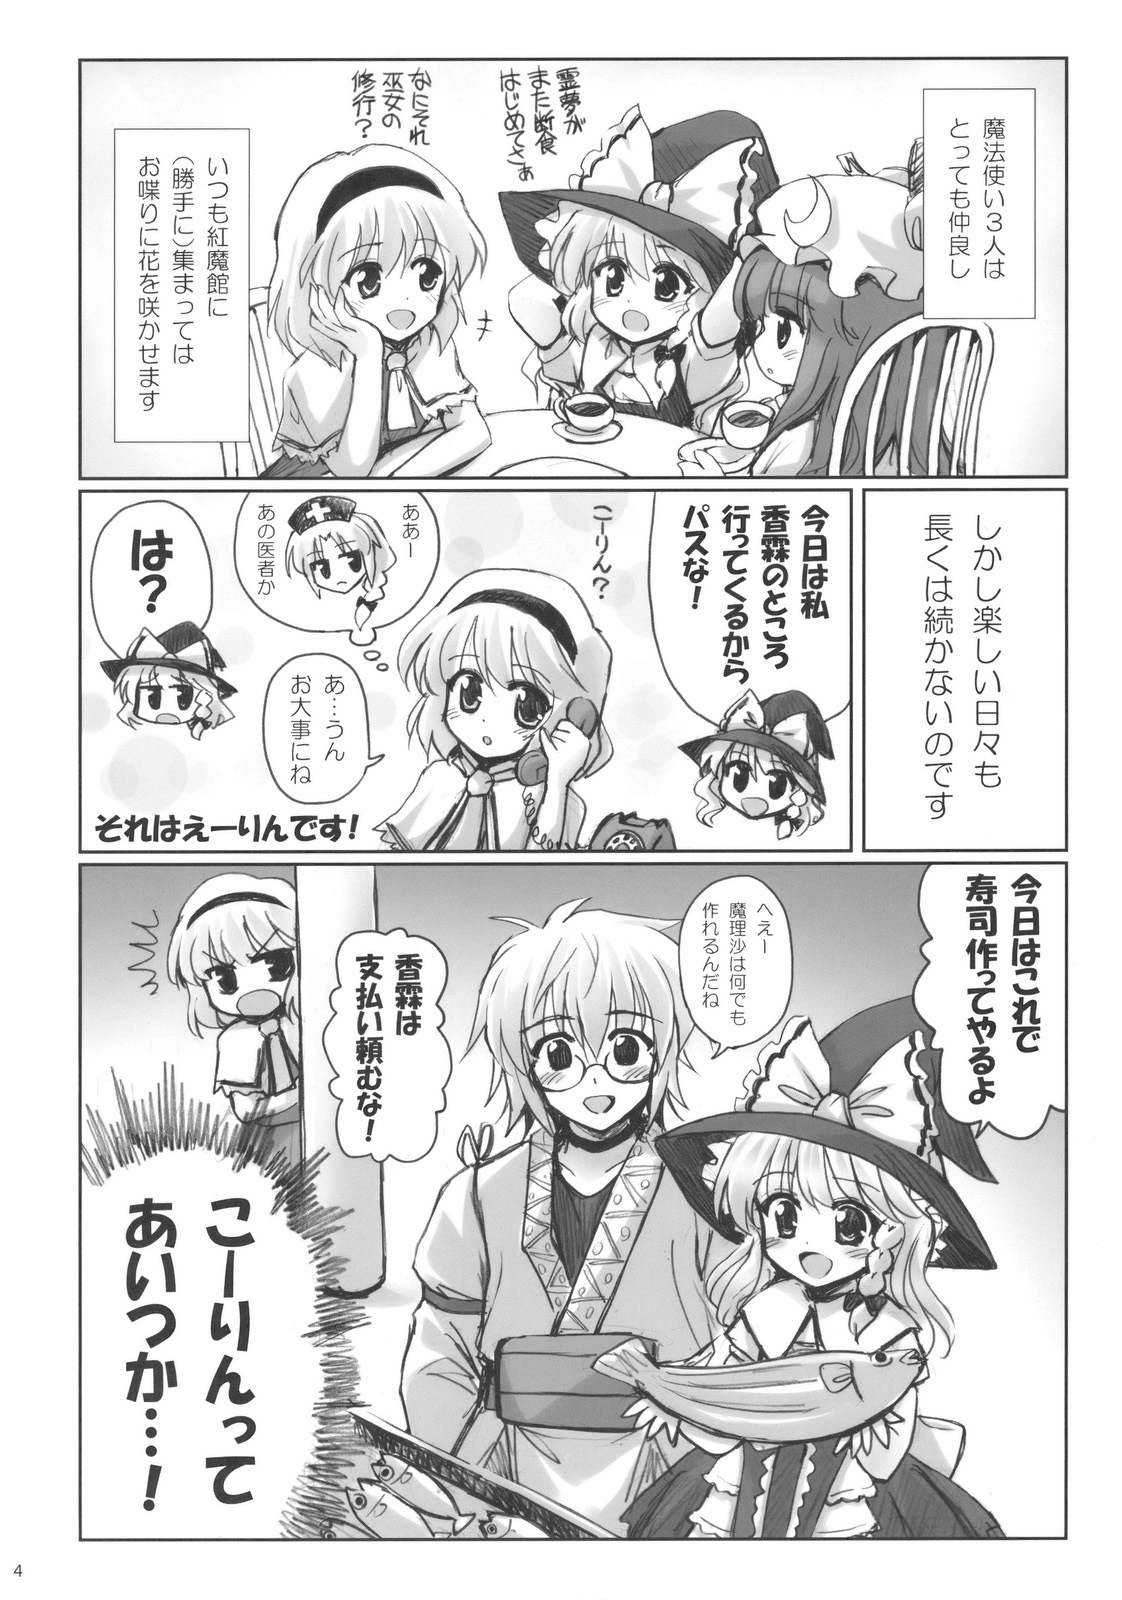 (C78) [54burger (Marugoshi)] ALICE IN NIGHTMARE (Touhou Project) page 4 full